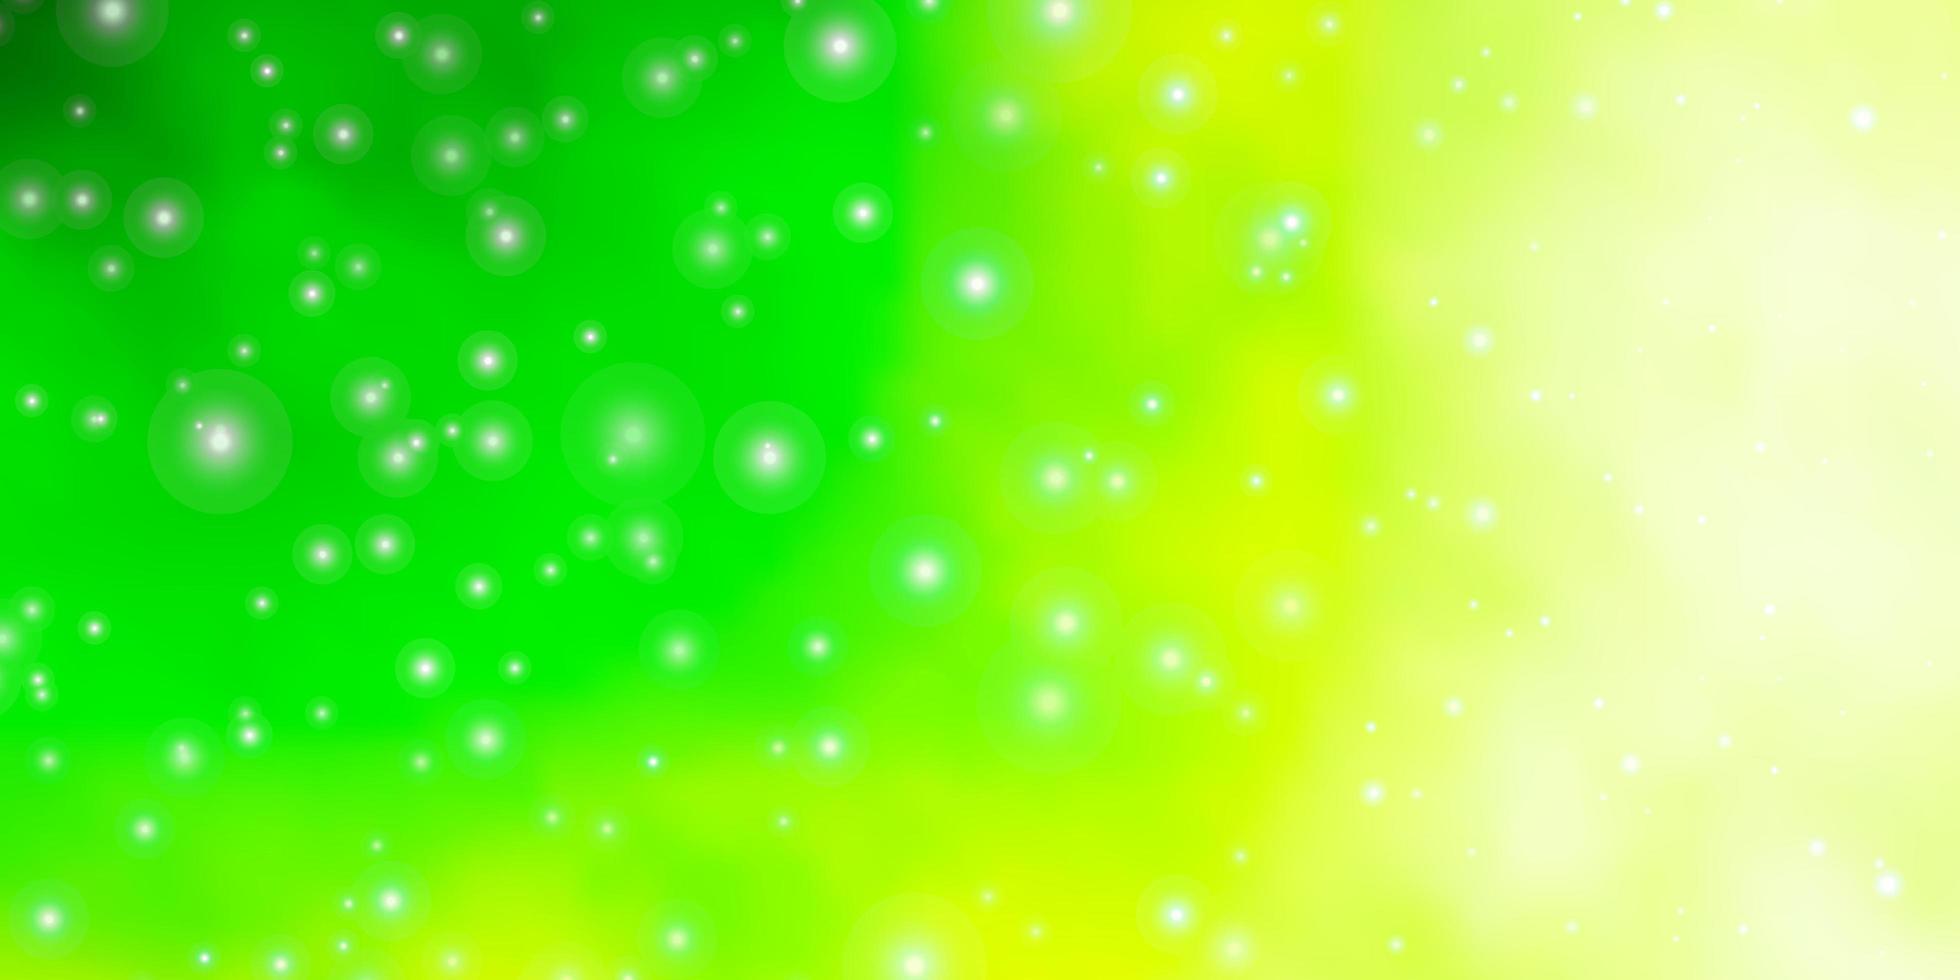 Light Green vector layout with bright stars. Colorful illustration in abstract style with gradient stars. Theme for cell phones.